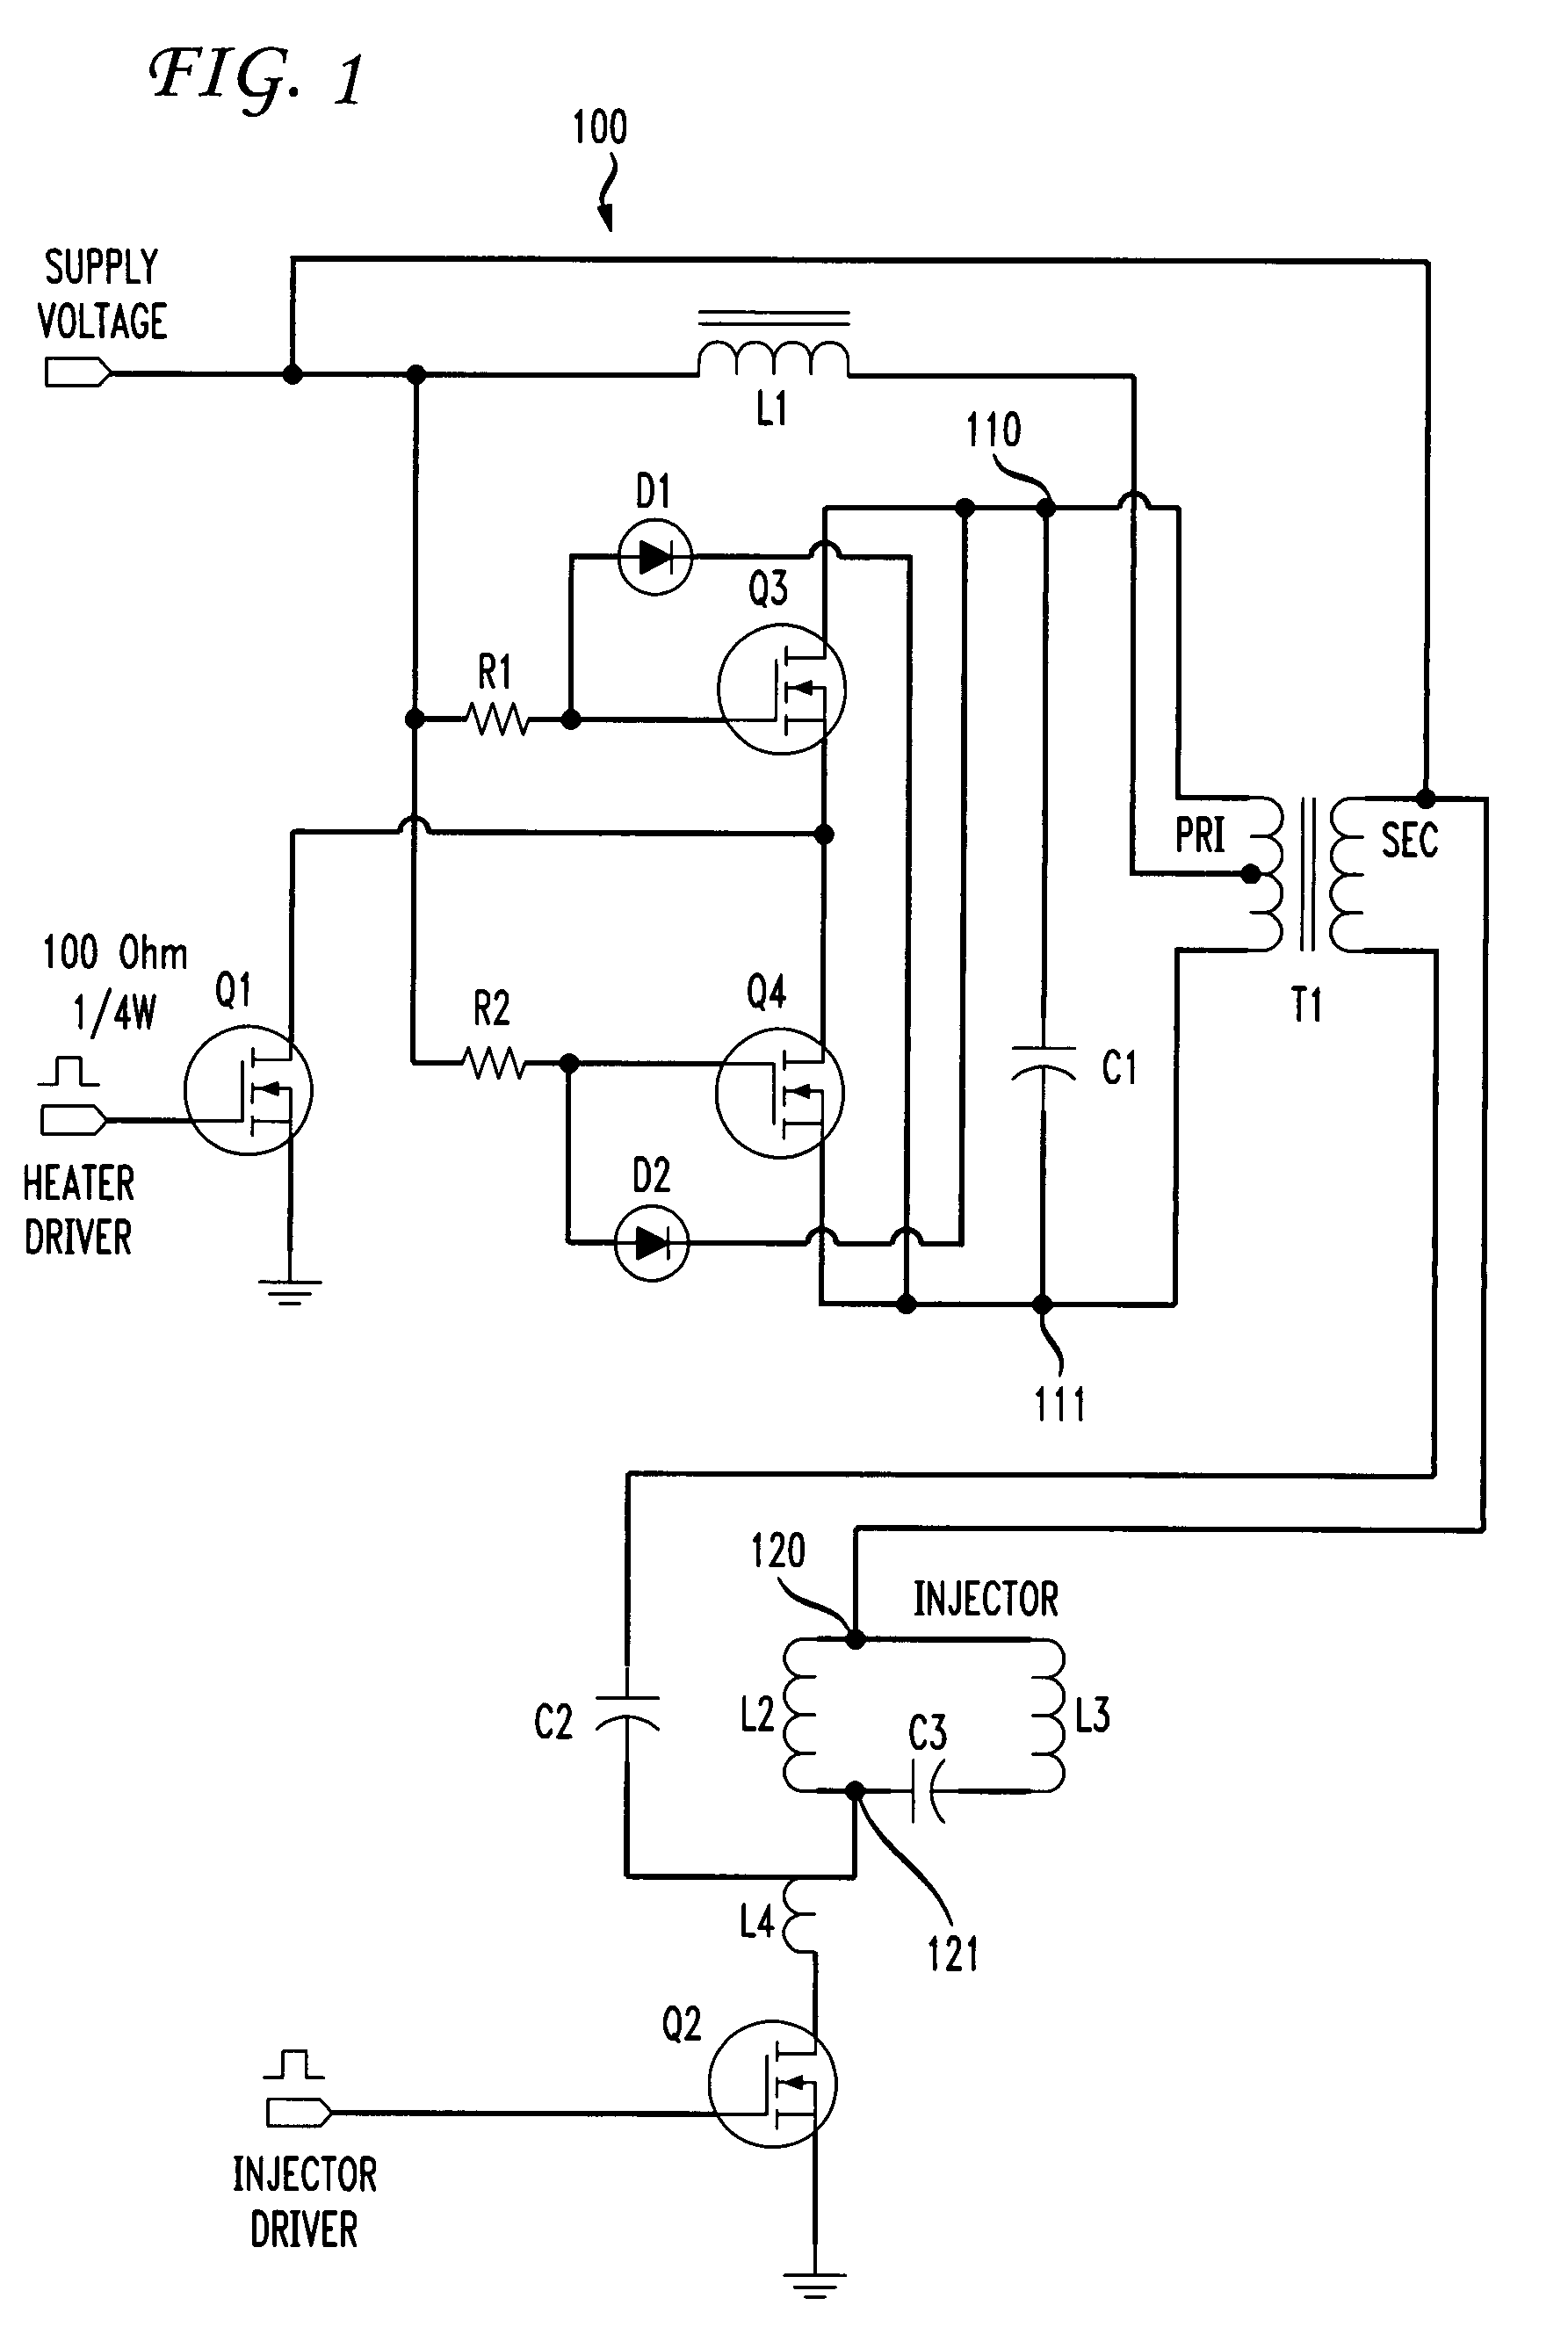 Constant current zero-voltage switching induction heater driver for variable spray injection